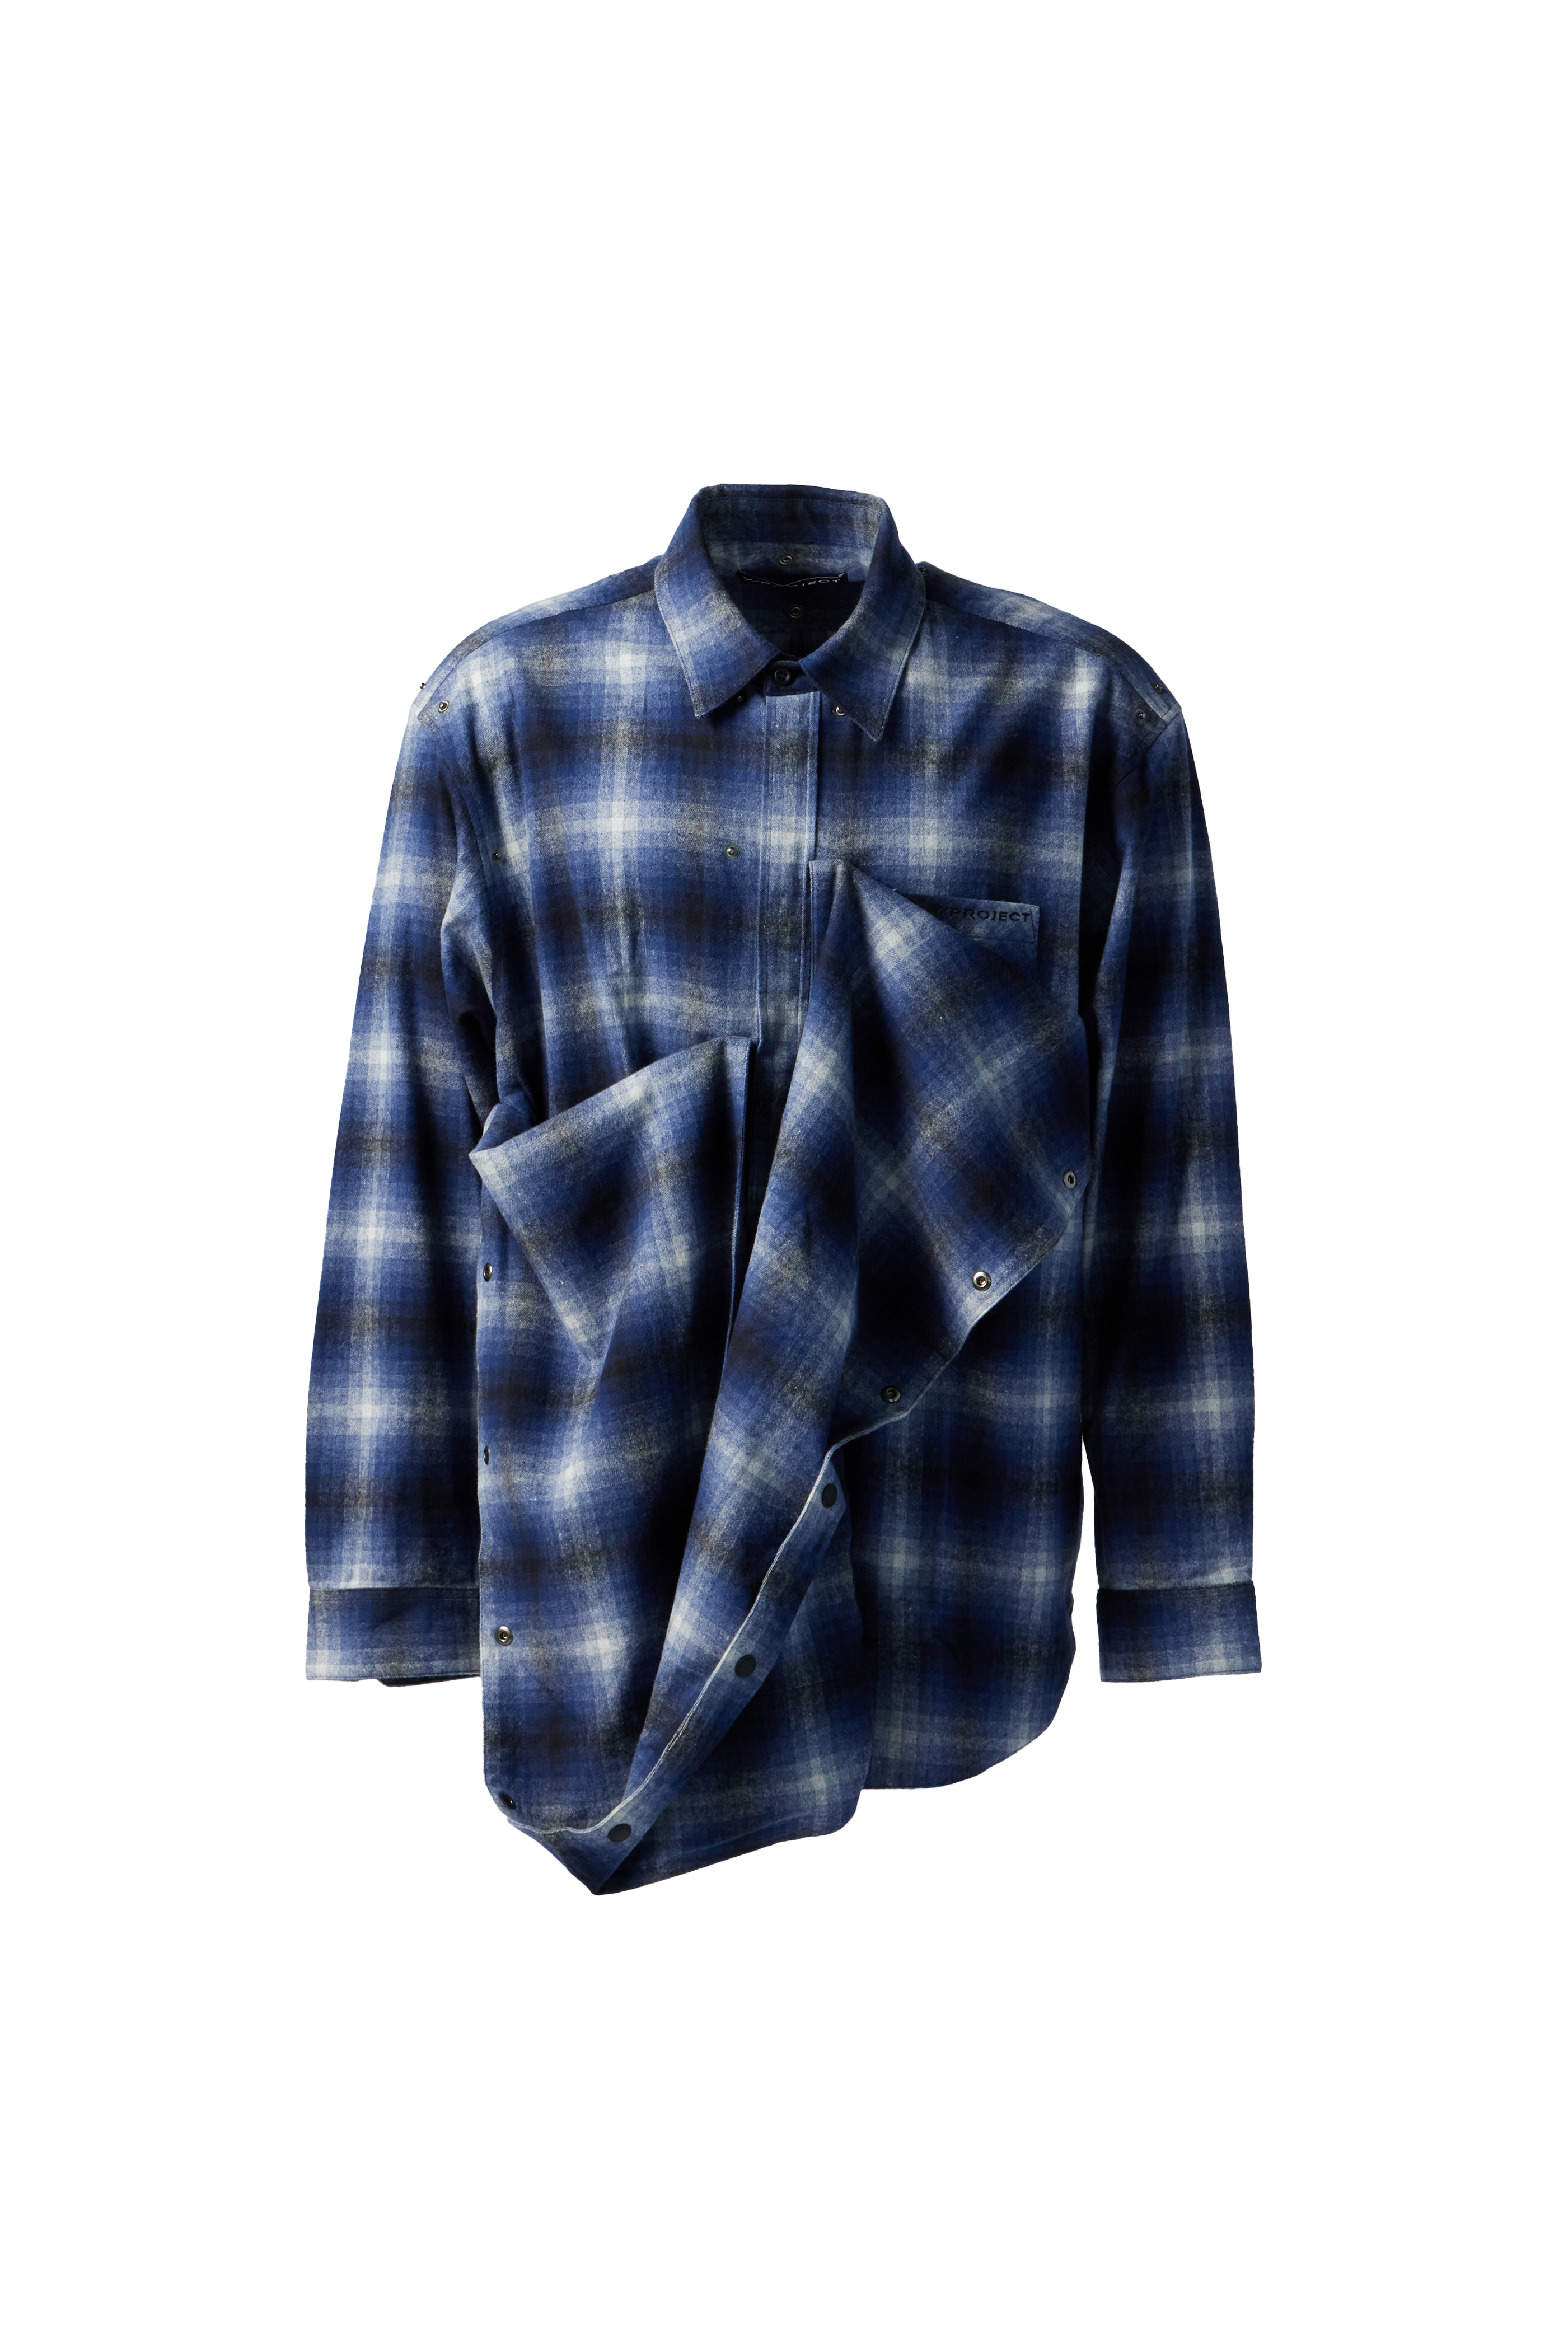 Y/PROJECT - Snap Off Panel Overshirt product image